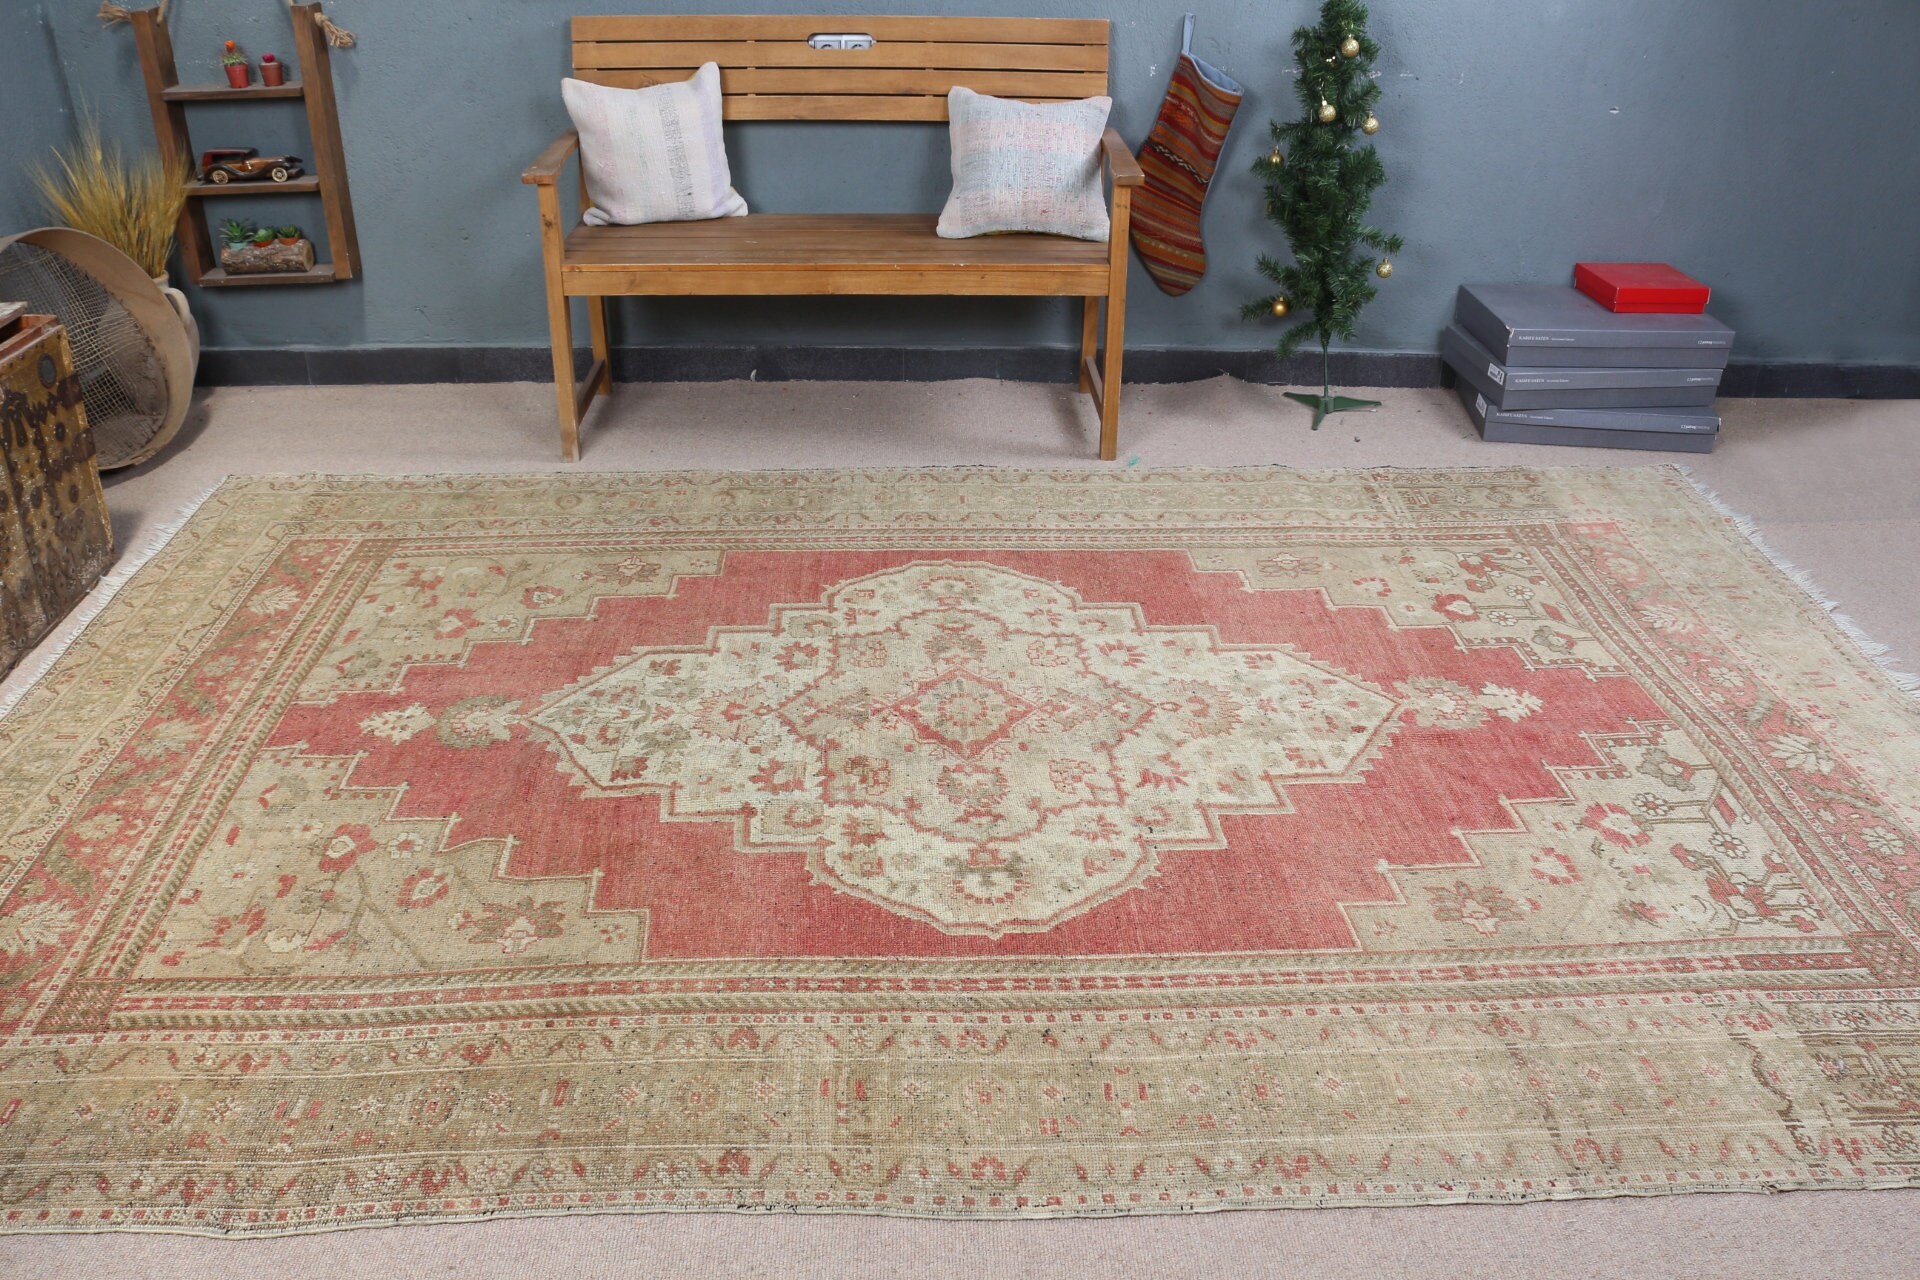 Vintage Rug, Dining Room Rugs, Cool Rug, 6.9x10.7 ft Oversize Rugs, Saloon Rugs, Red Moroccan Rugs, Turkish Rug, Boho Rugs, Home Decor Rug